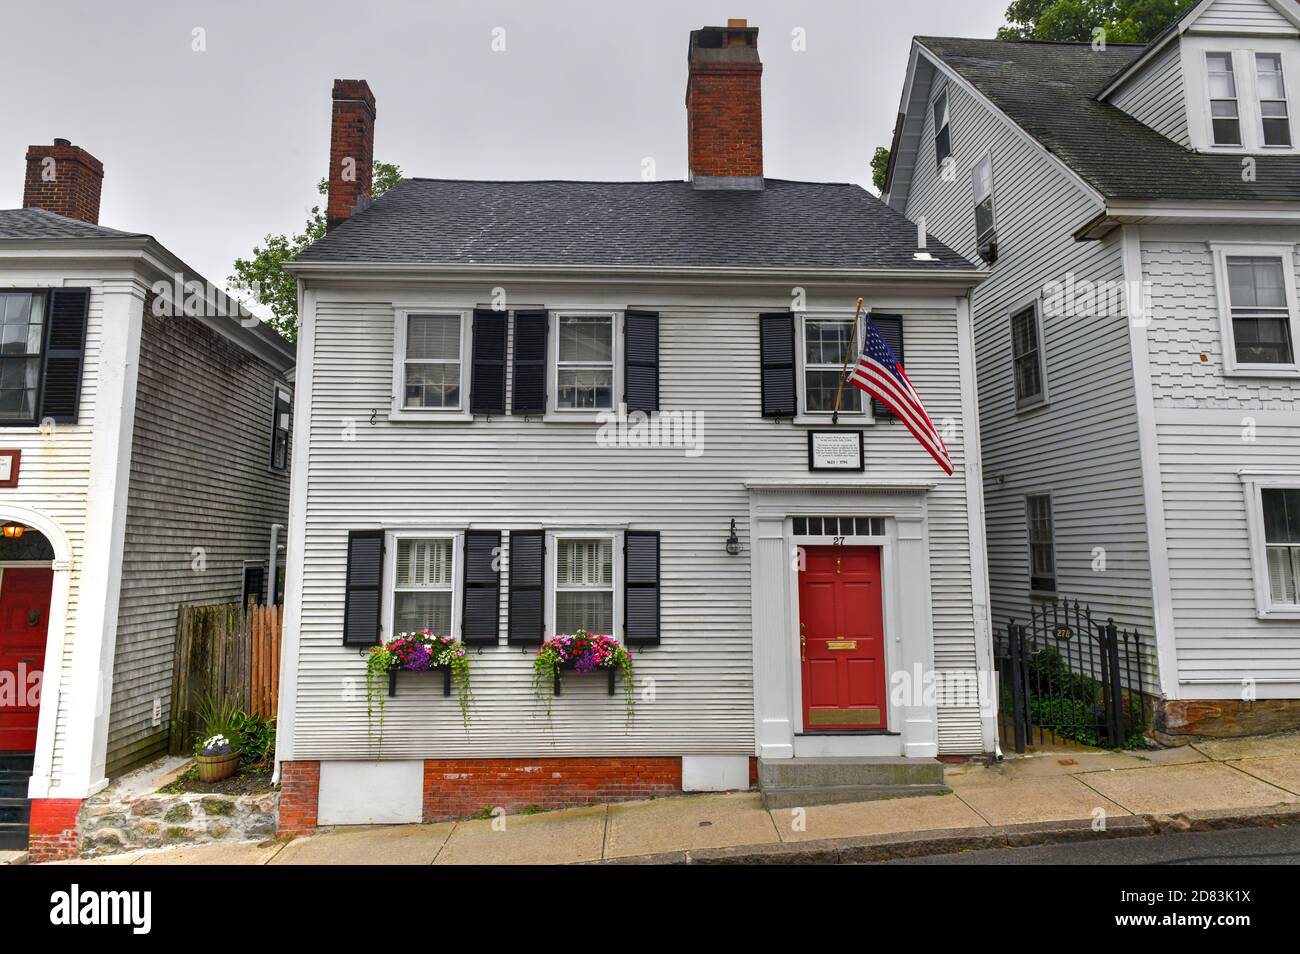 Plymouth, MA - July 3, 2020: Leyden Street, created in 1620 by the Pilgrims, and claims to be the oldest continuously inhabited street in the thirteen Stock Photo